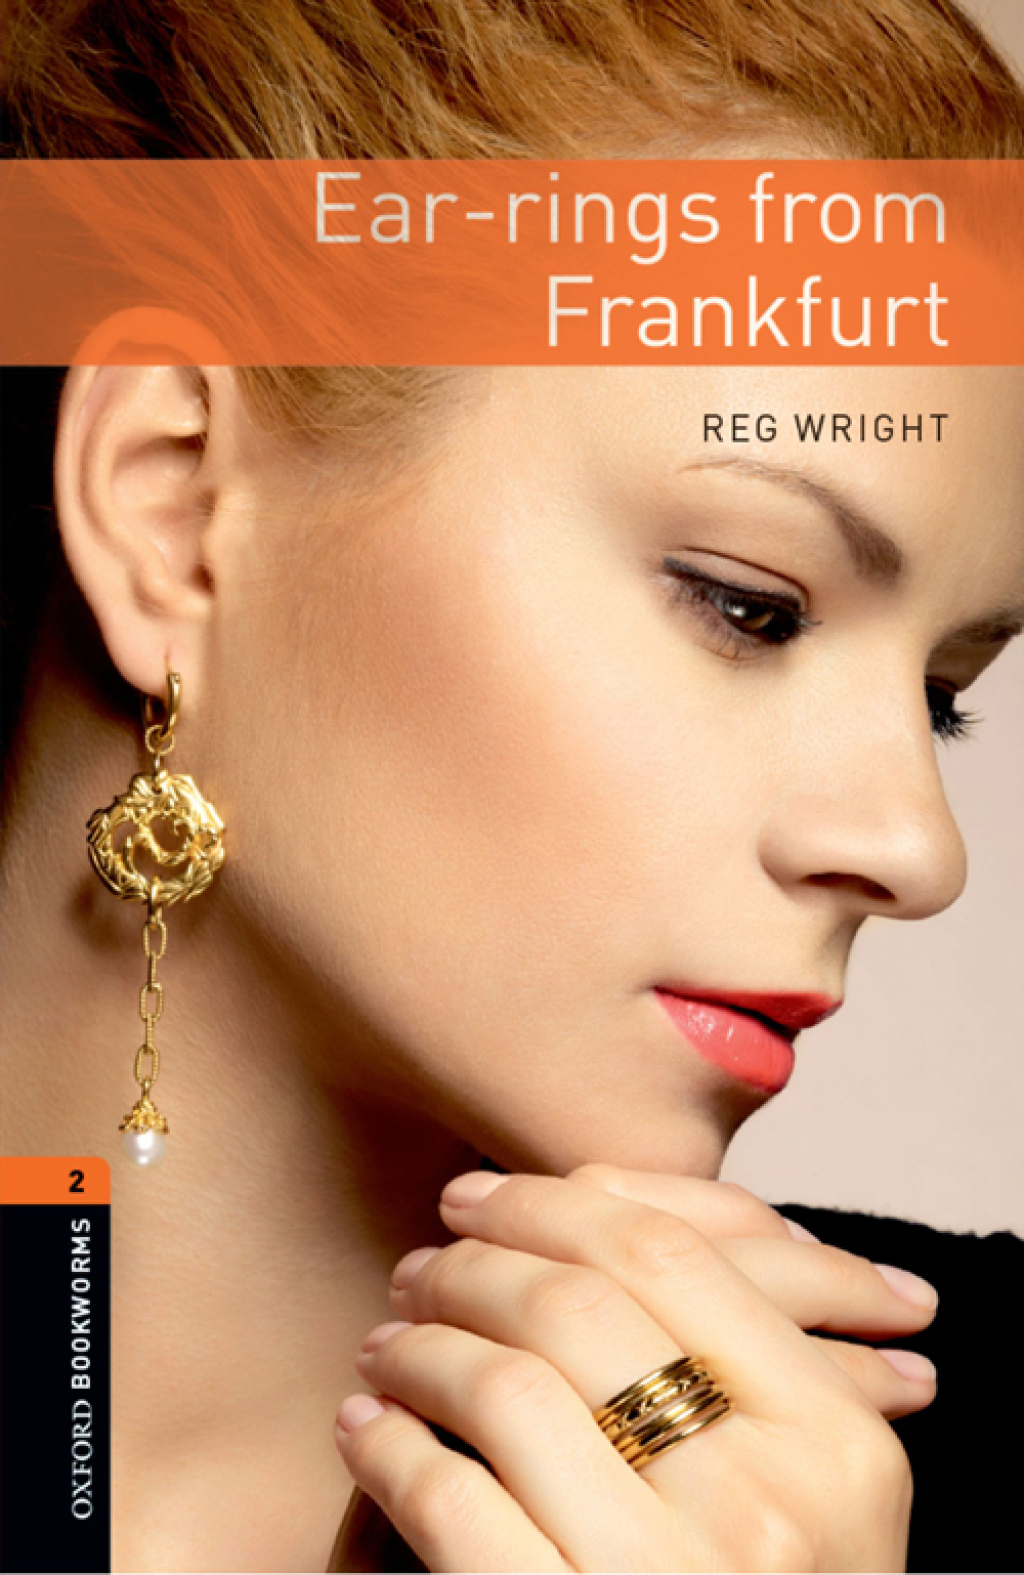 Ear-rings from Frankfurt Level 2 Oxford Bookworms Library - 3rd Edition (eBook Rental)